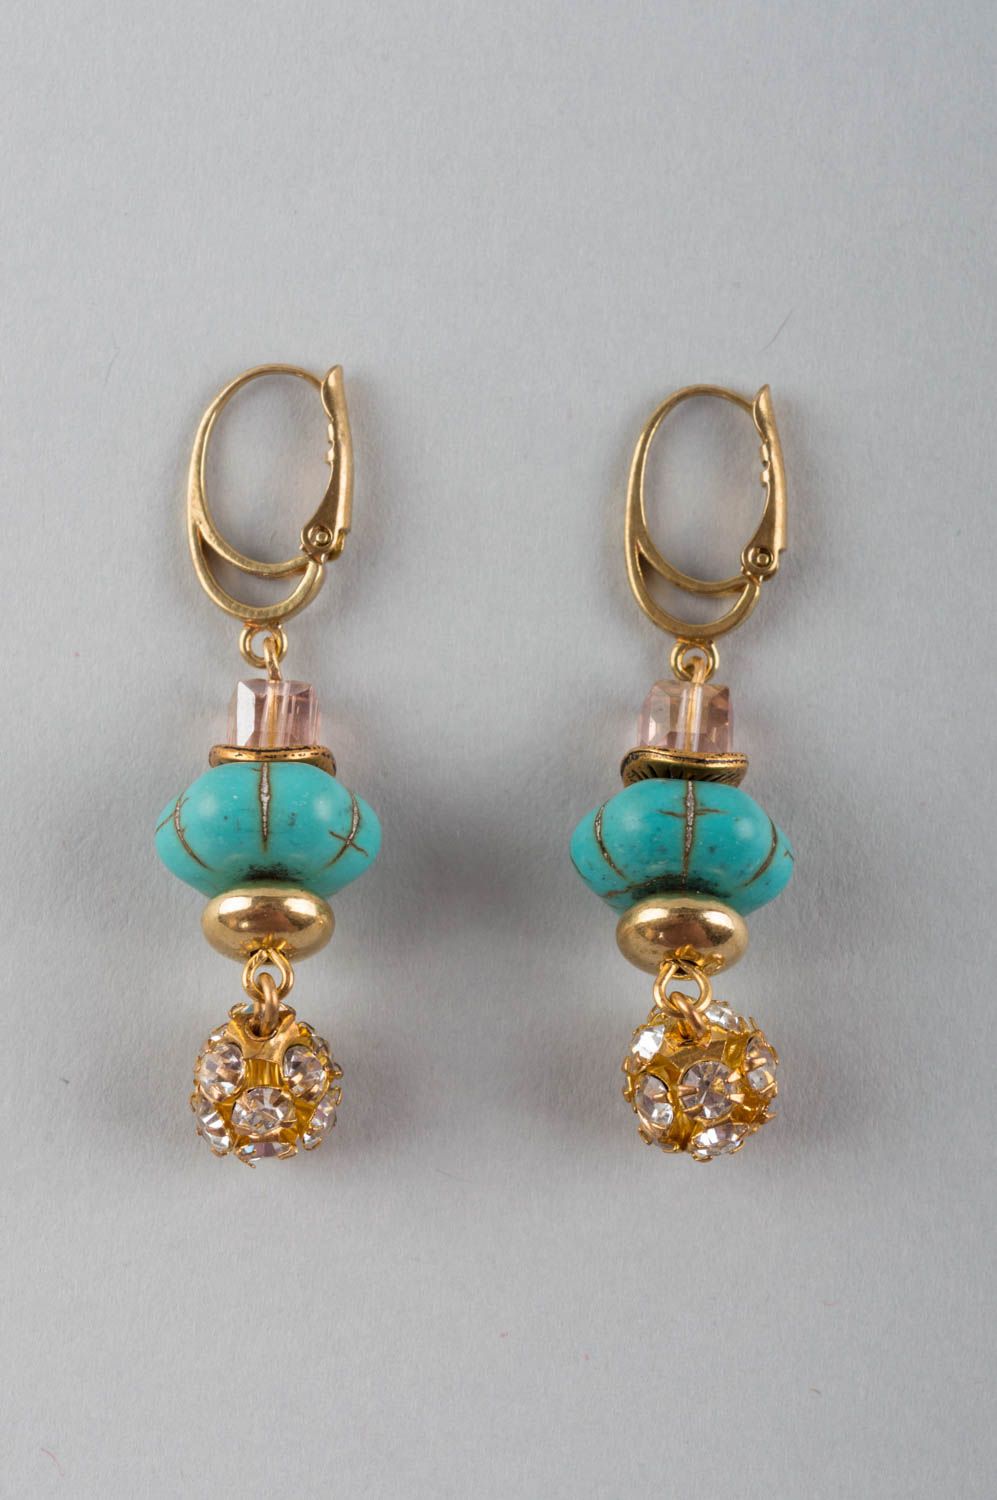 Earrings with natural stone charms brass jewelry beautiful turquoise accessory photo 2